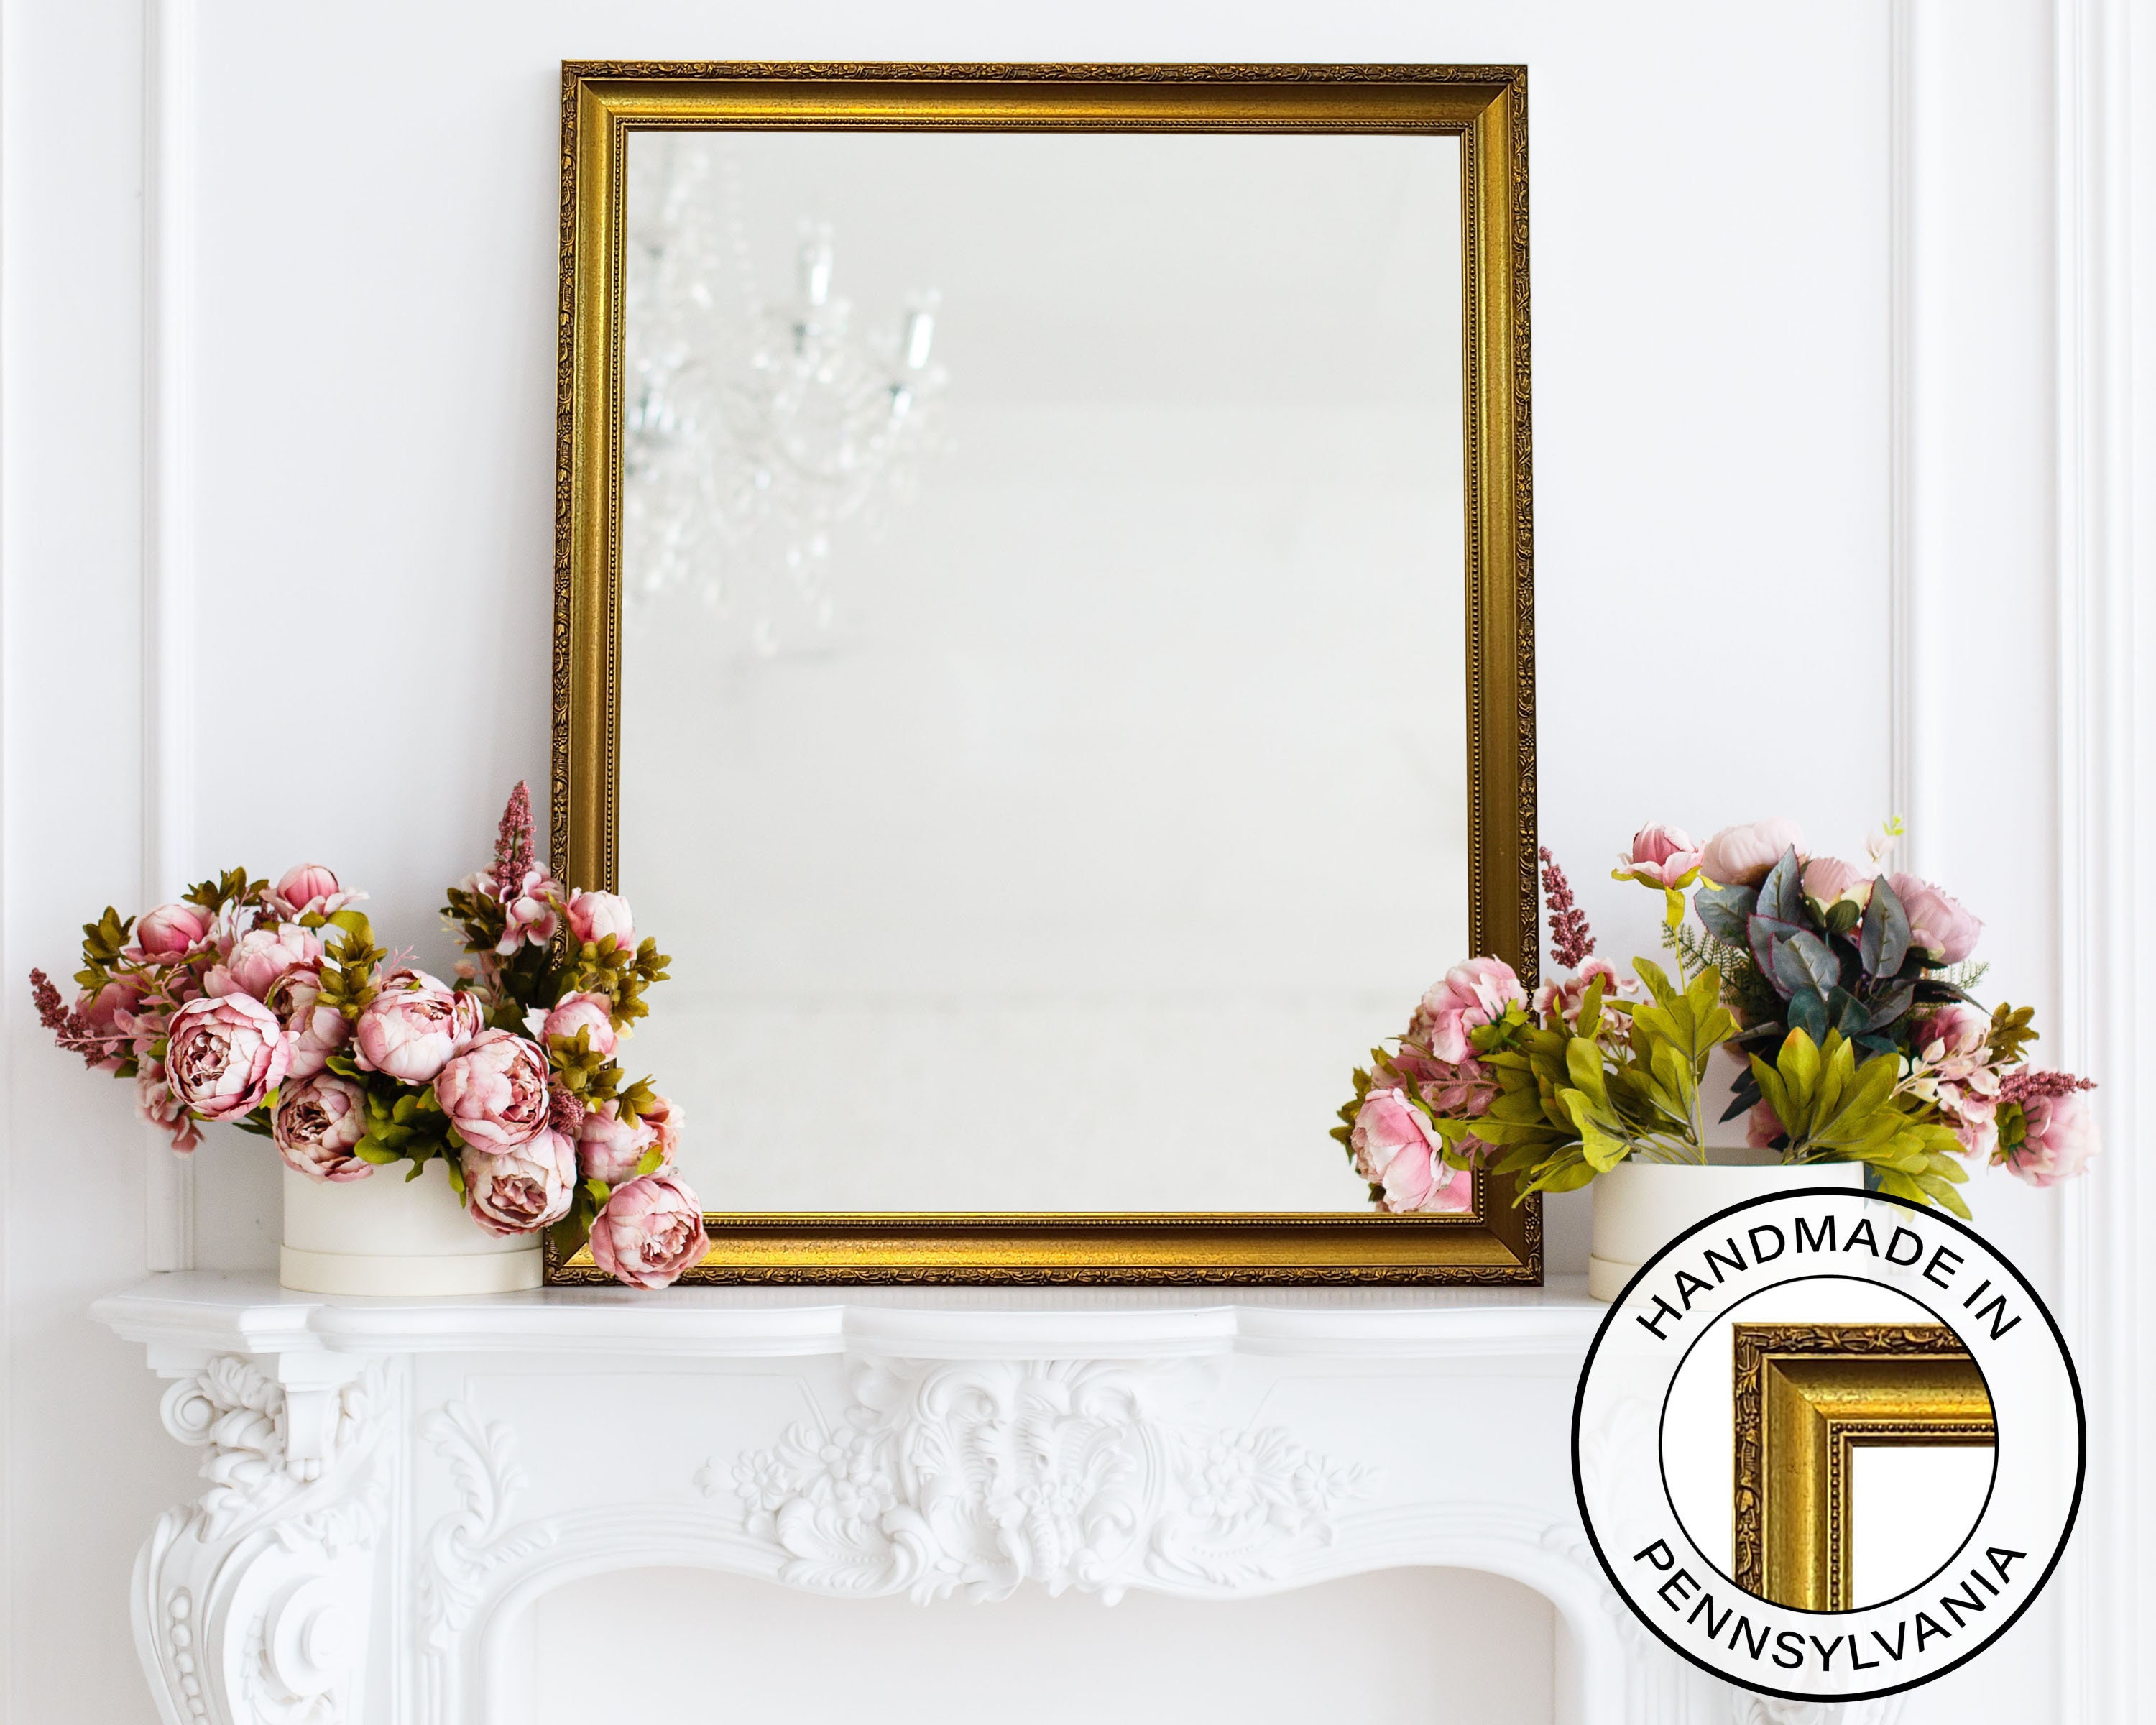 3-1/2 Polystyrene Classic 30x40 Picture Frame by Wholesaleartsframes-com.  1972 Series. Gold, Silver & Bronze Made in USA 